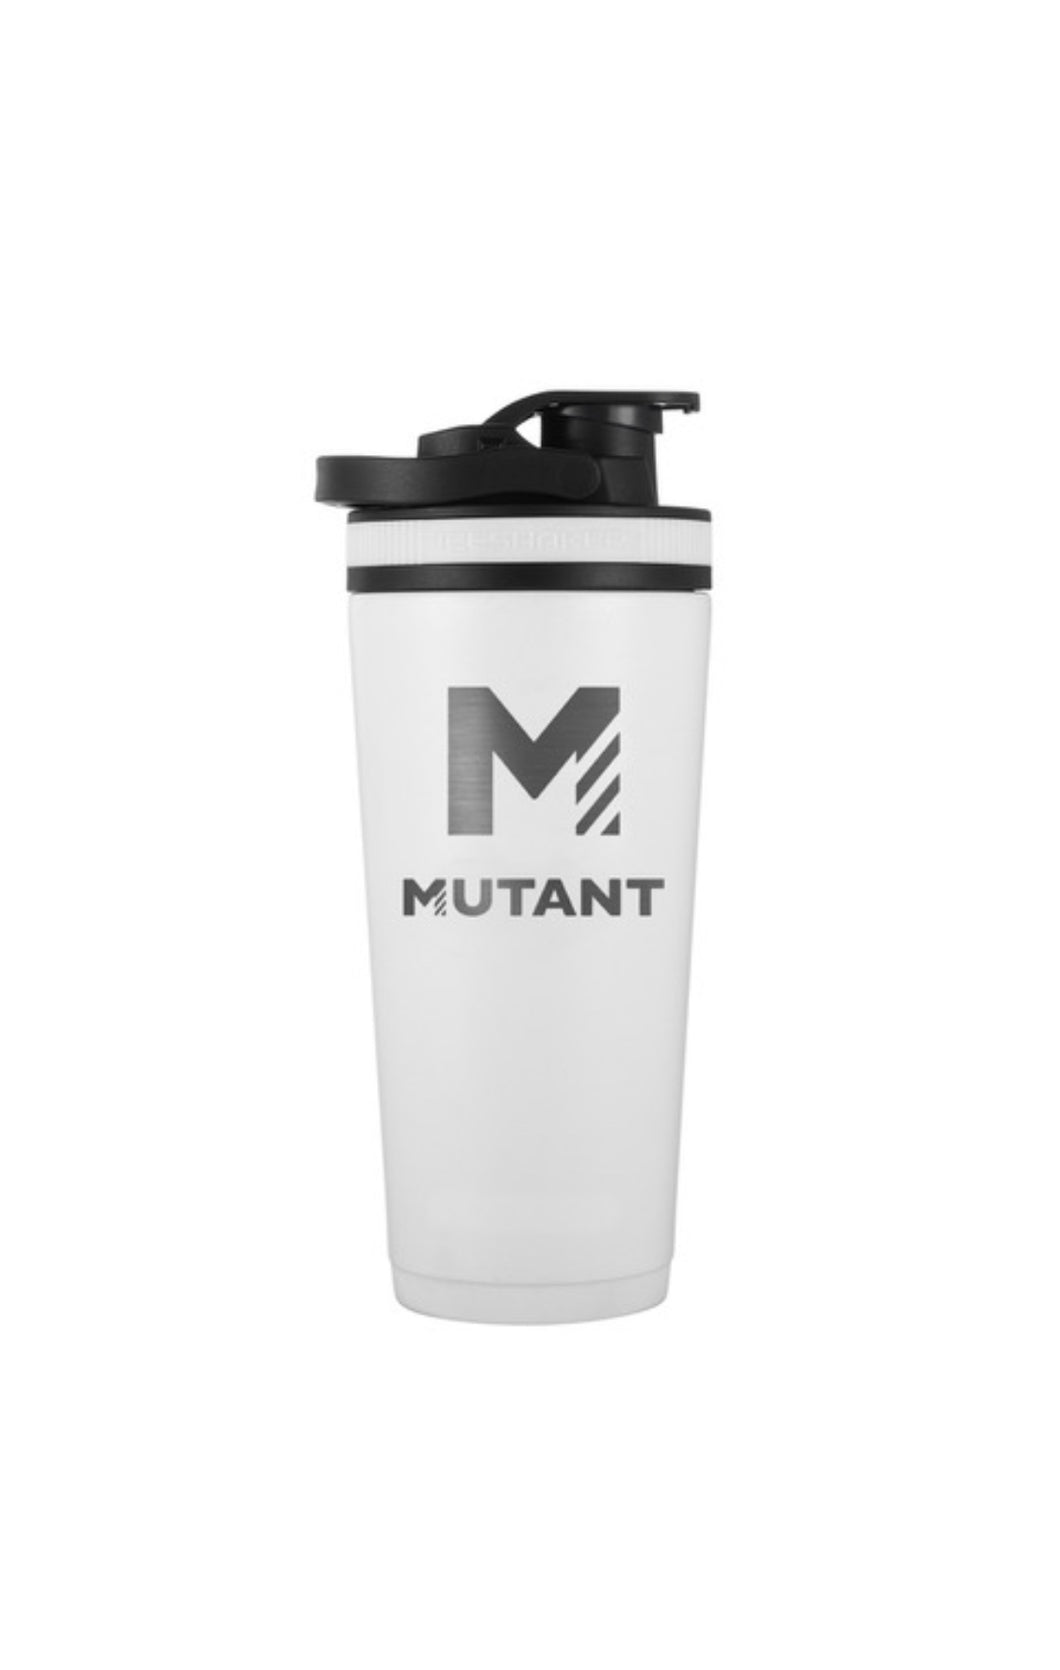 #5**New**White Mutant Ice Shaker Cup